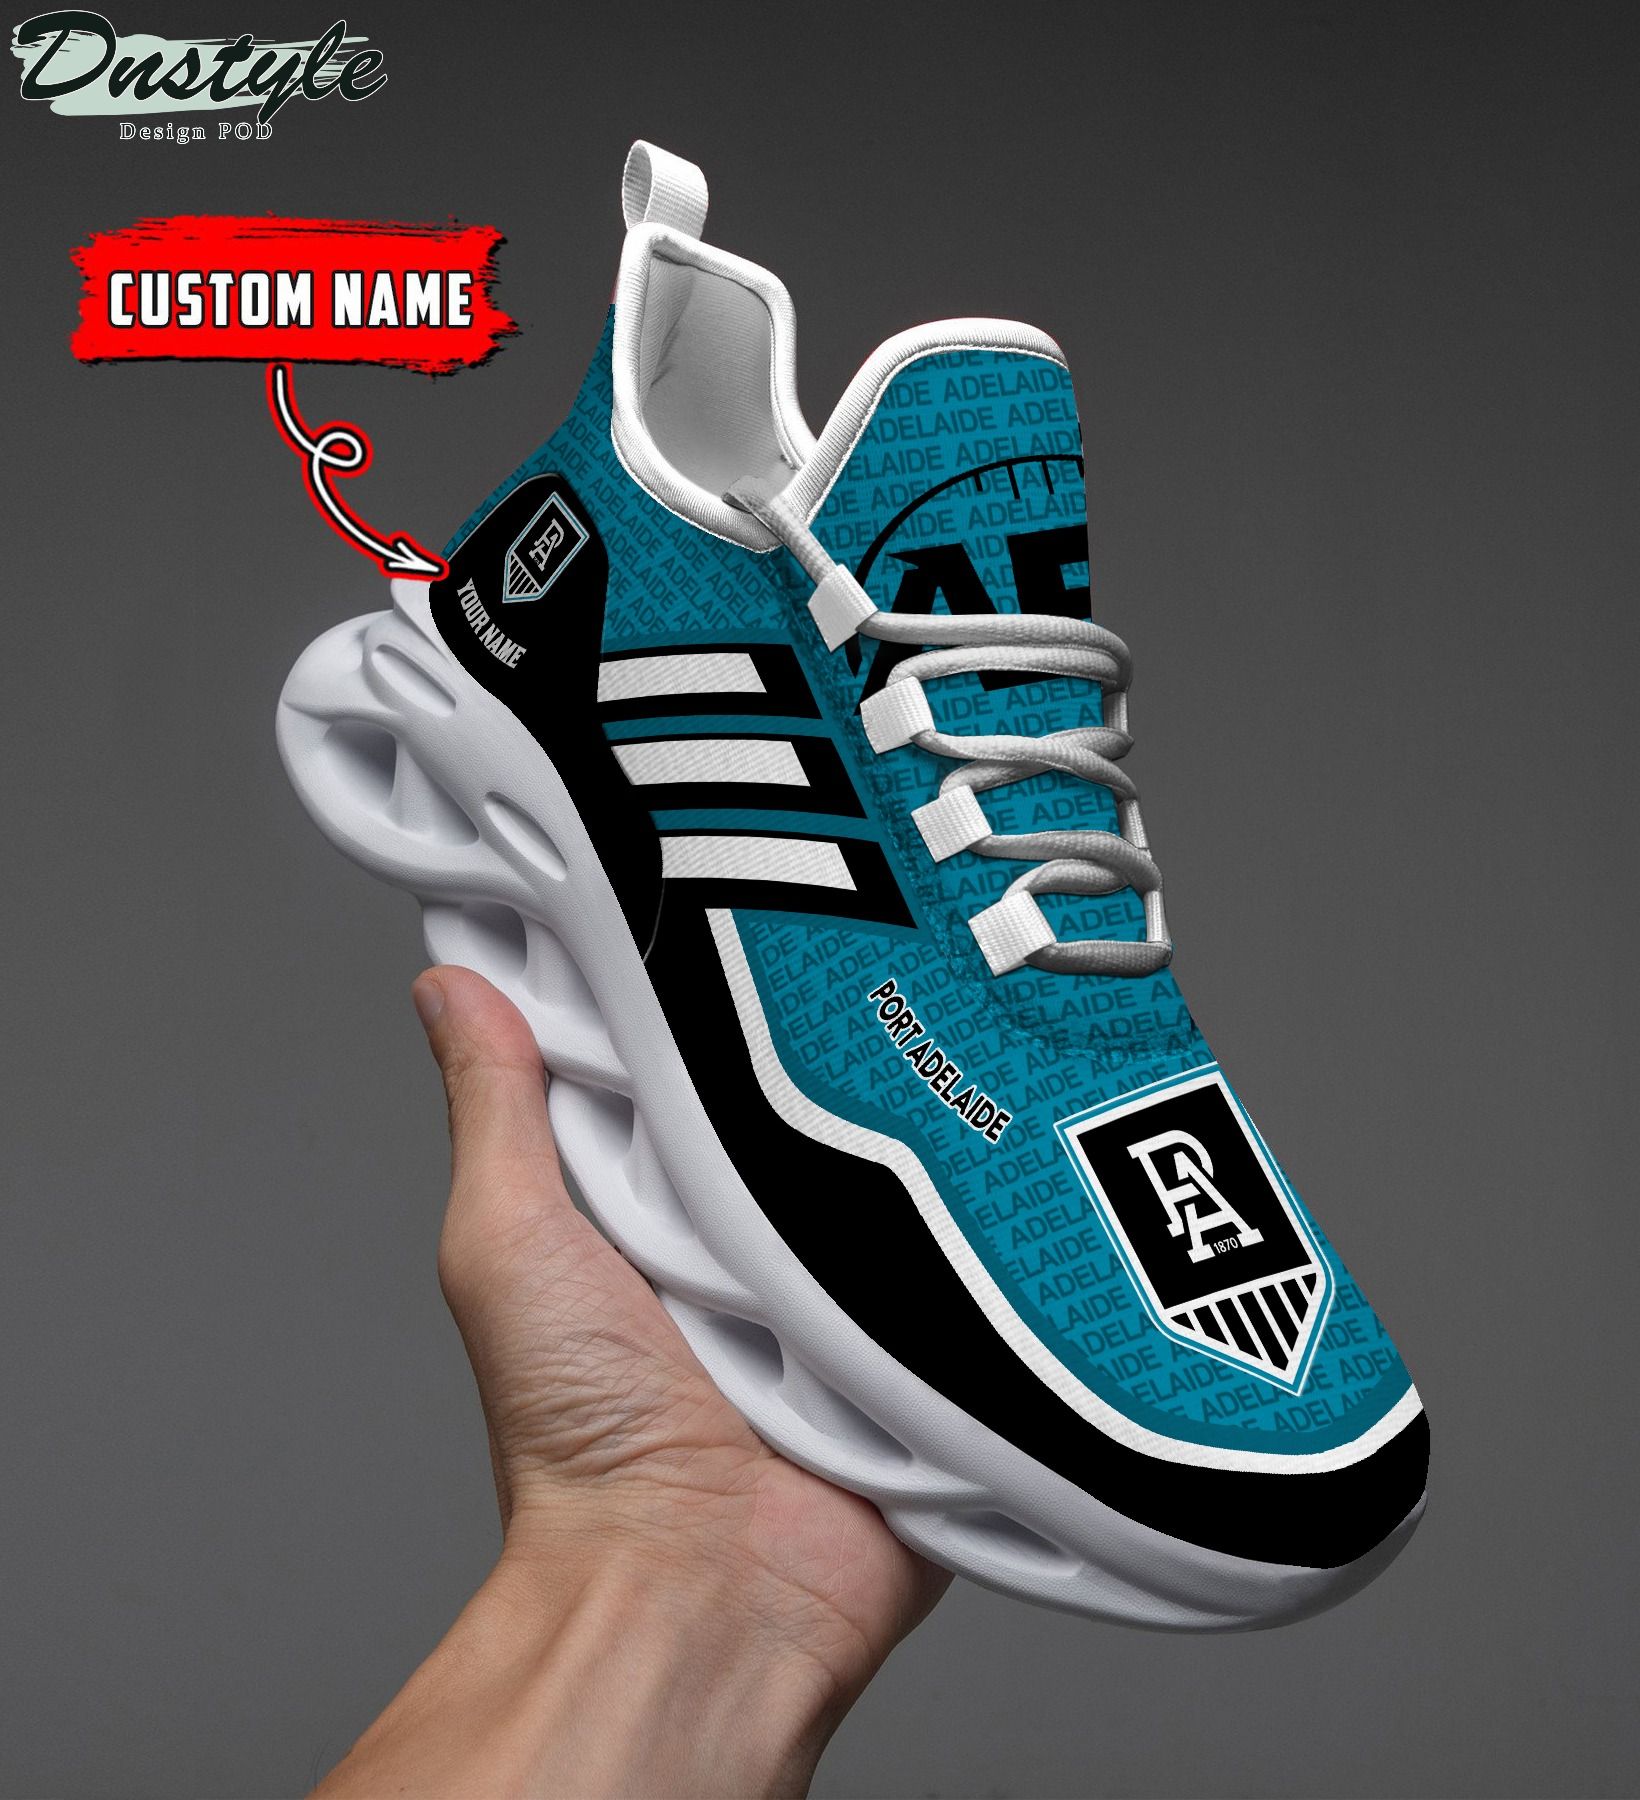 Port adelaide AFL personalized clunky max soul shoes